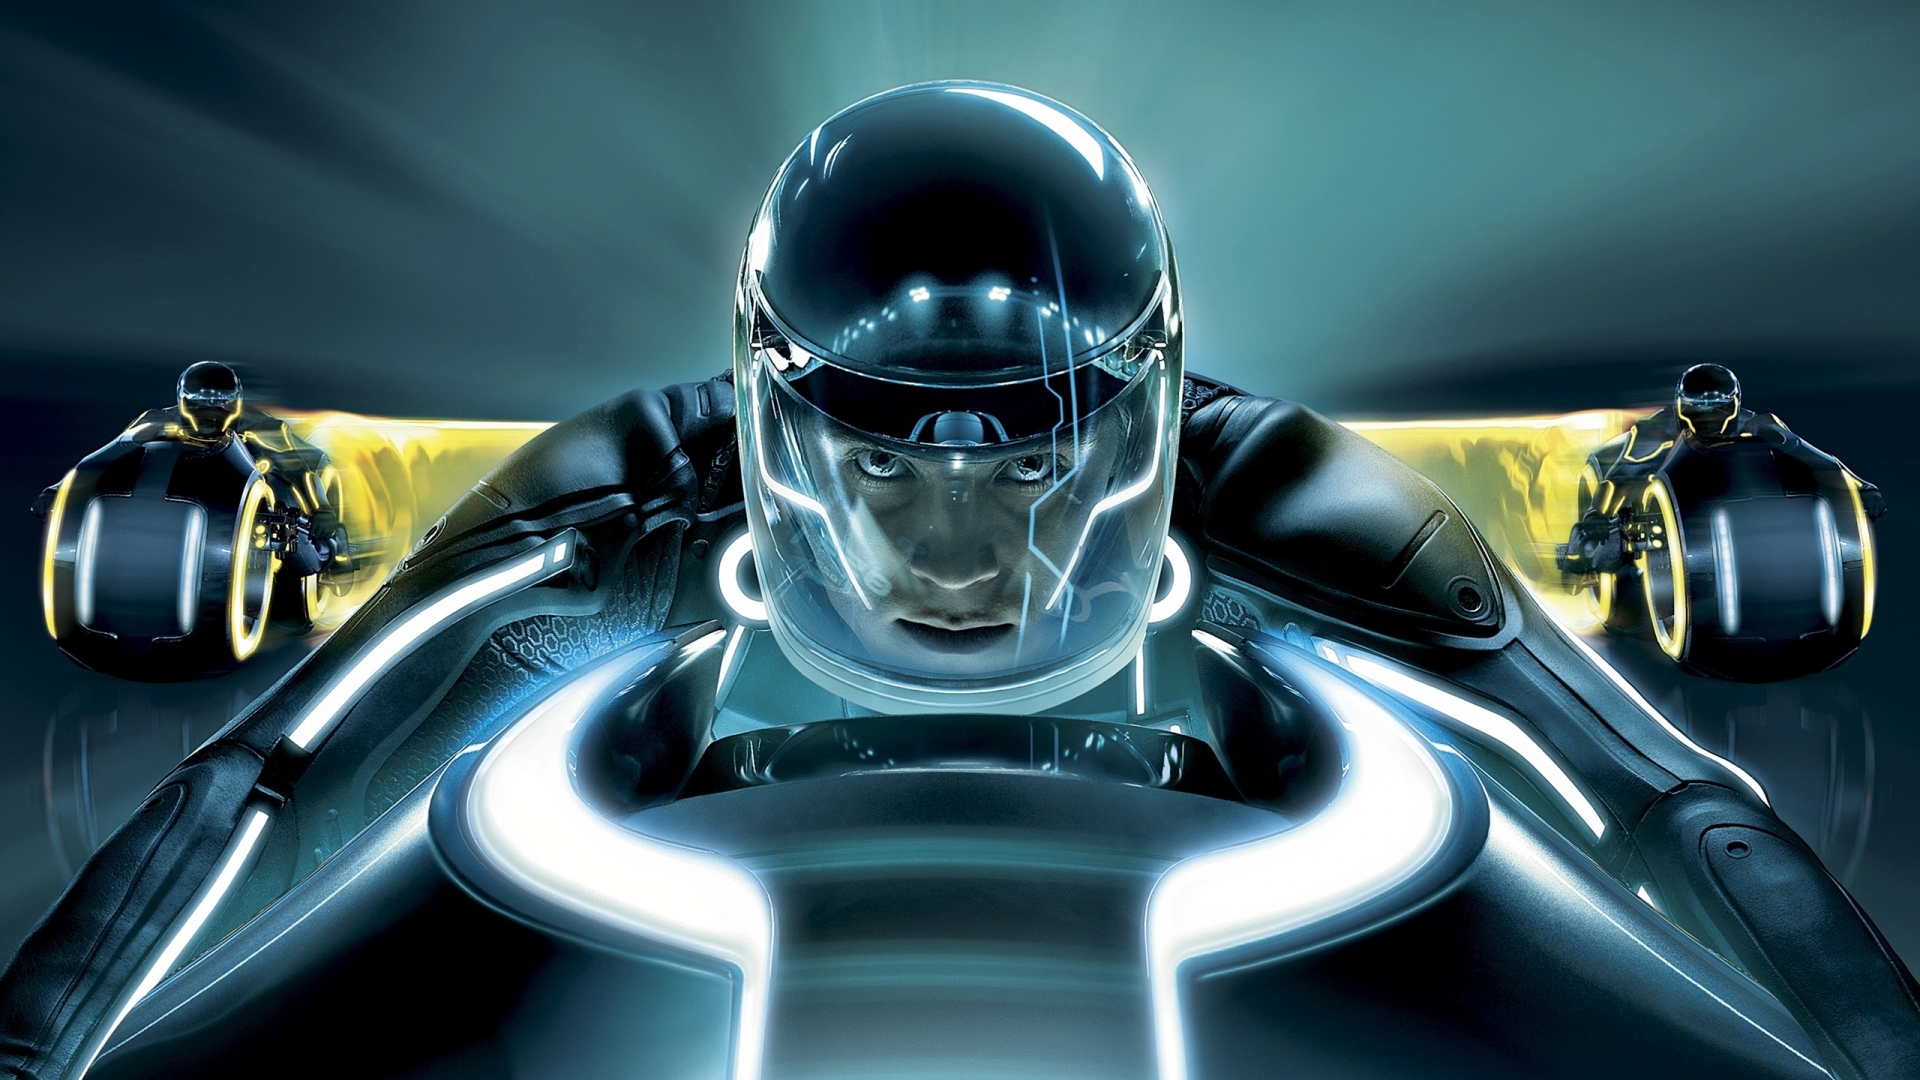 Tron Legacy Movie for 1920 x 1080 HDTV 1080p resolution